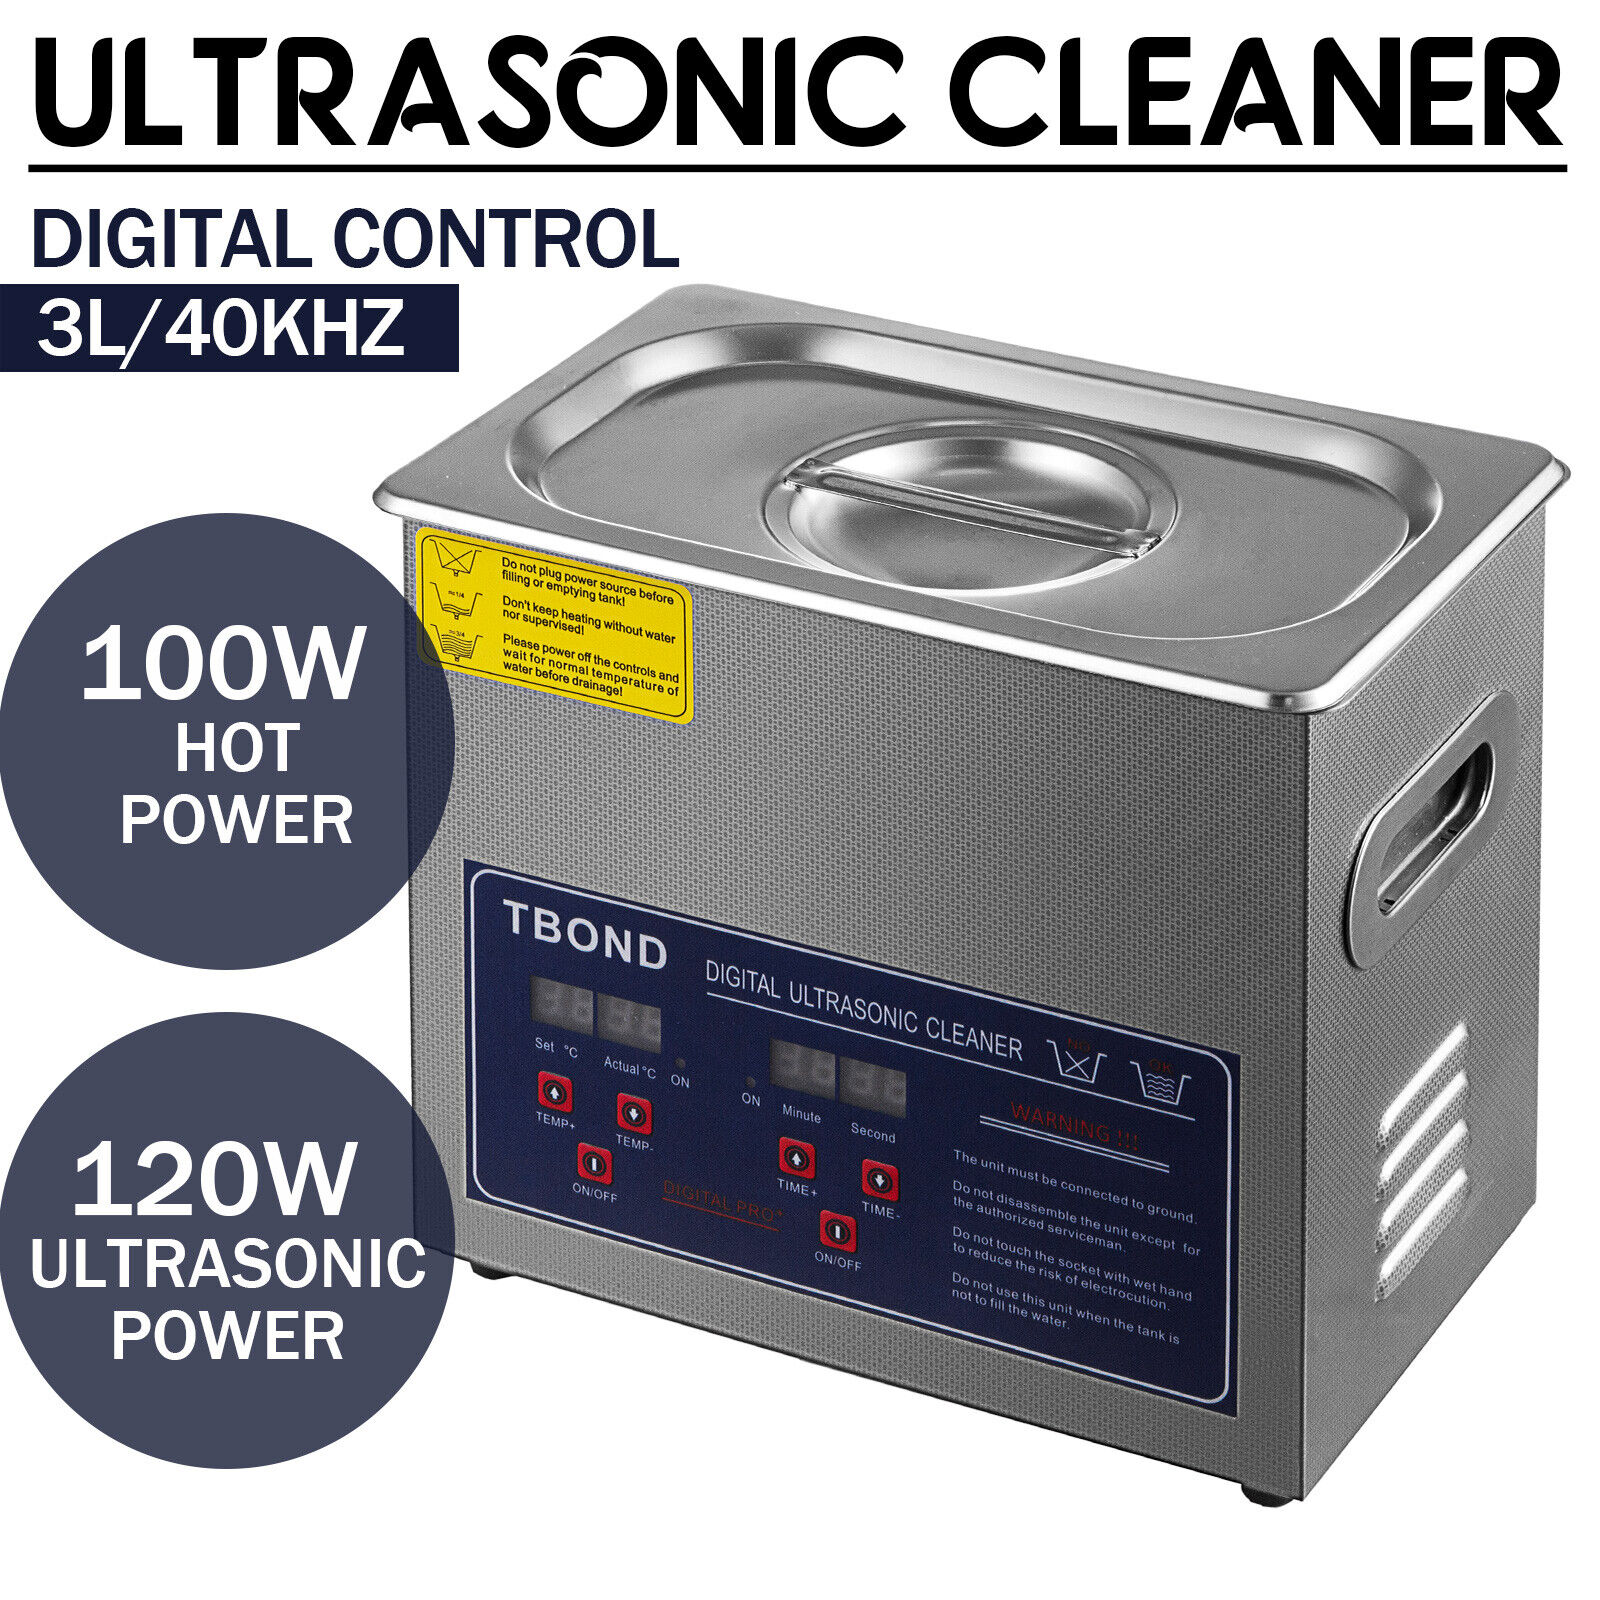 New 30L Ultrasonic Cleaner Cleaning Equipment Liter Heated W/ Timer Heater